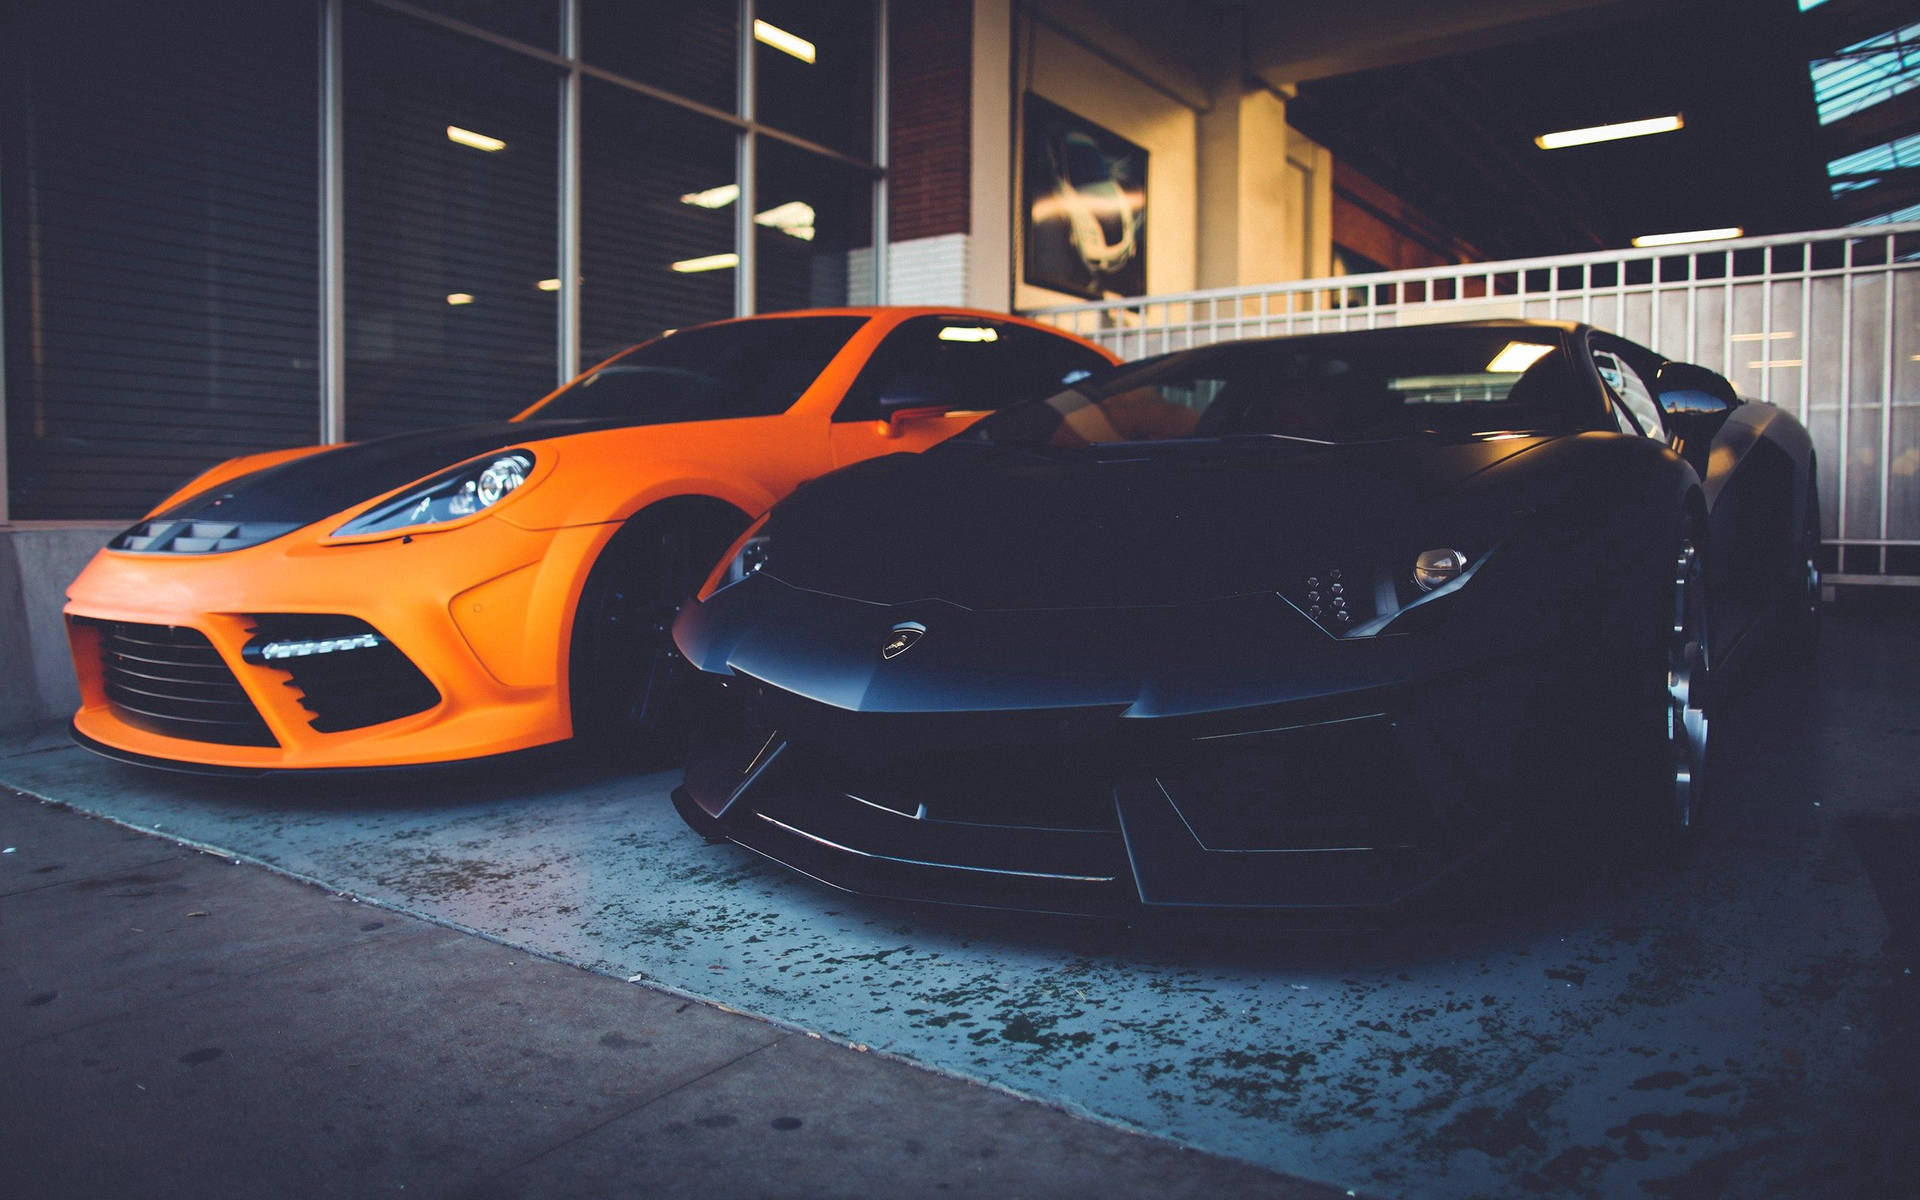 Power And Style - Two Luxury Lamborghinis Background